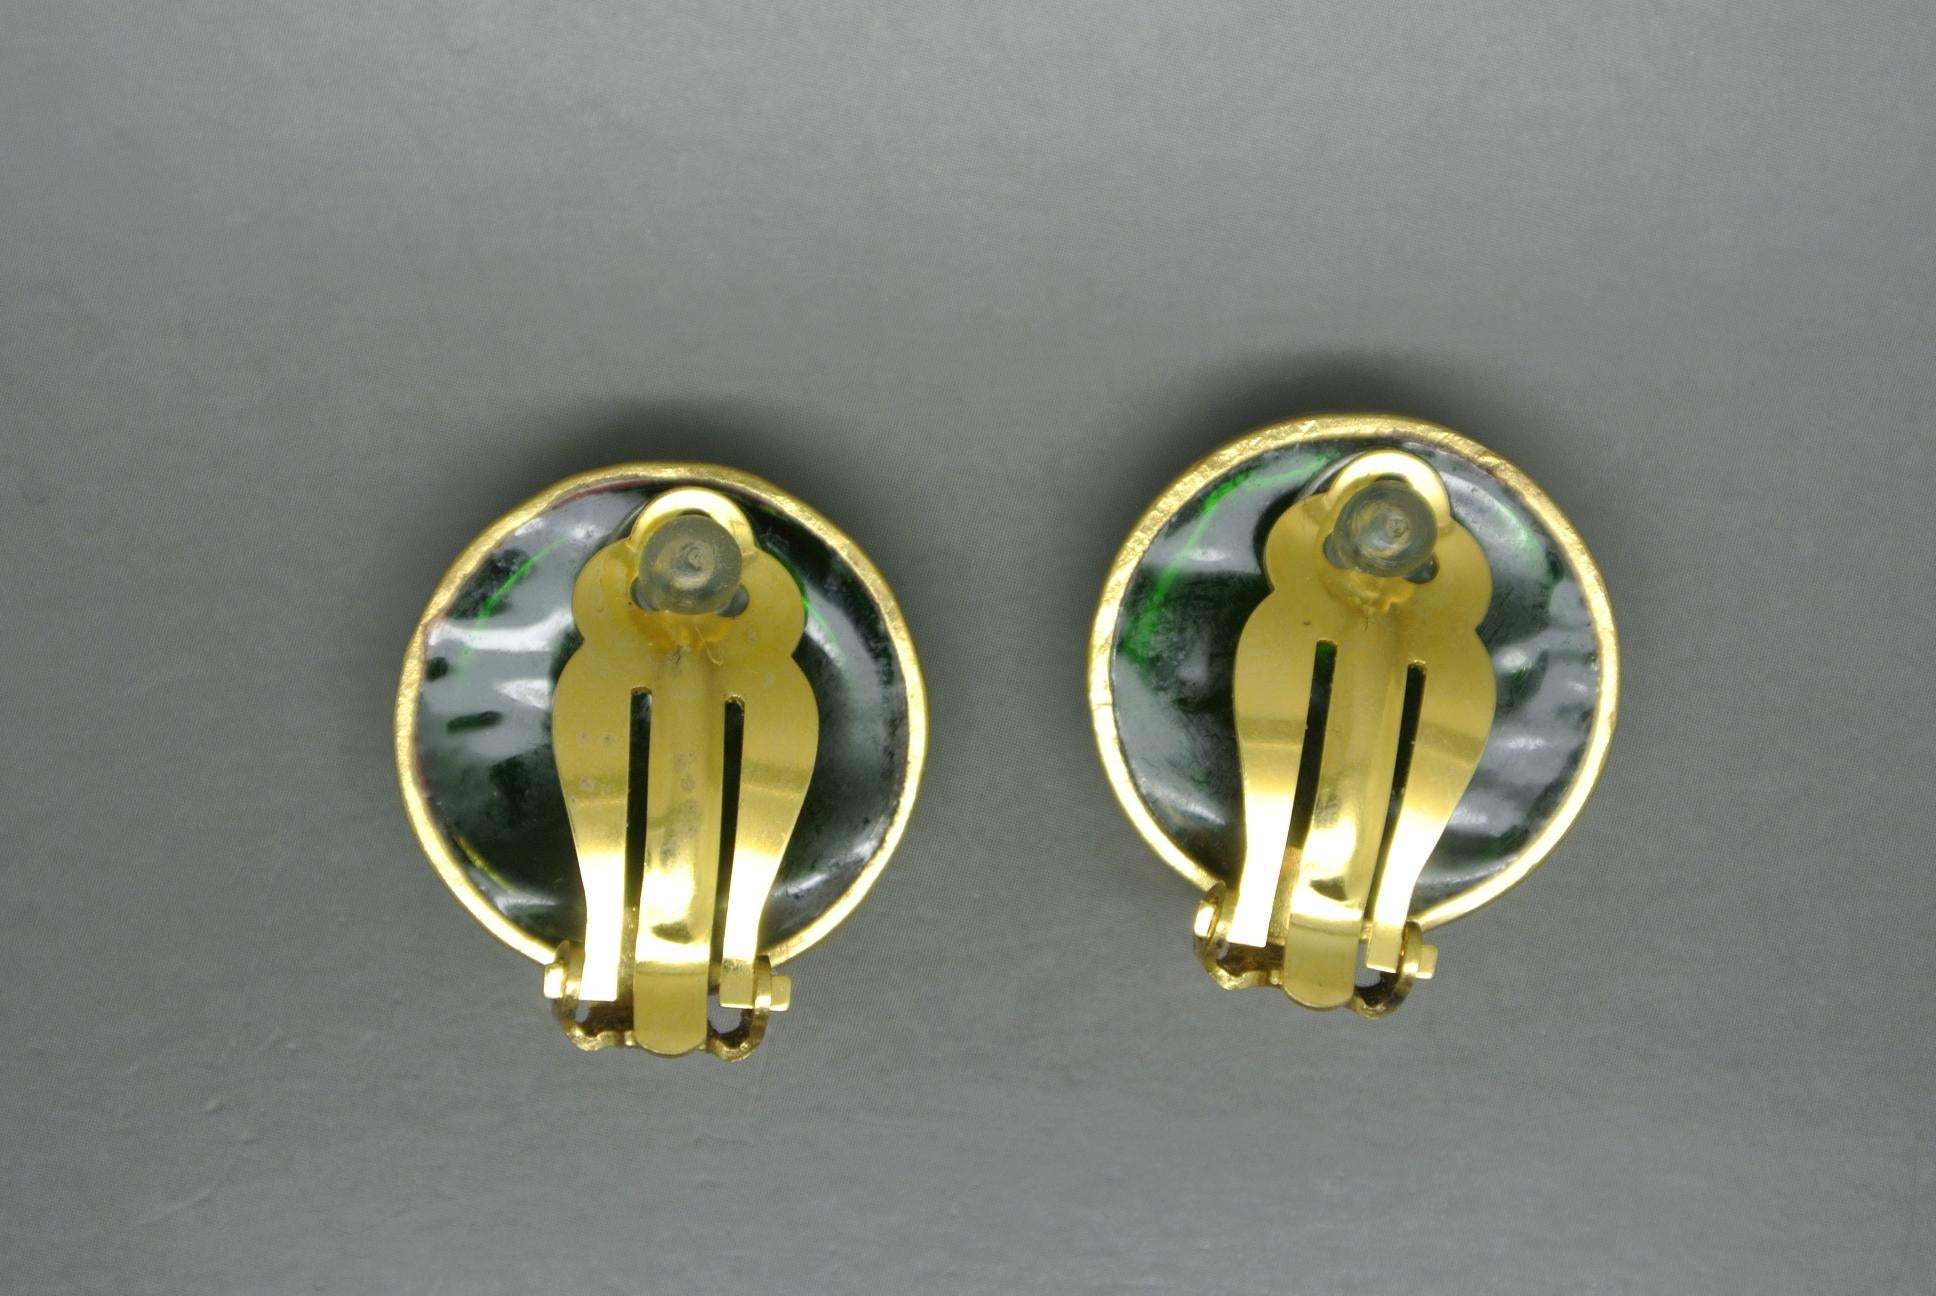 Couture earrings
Made in france originally
by Gripoix
classic design
not signed